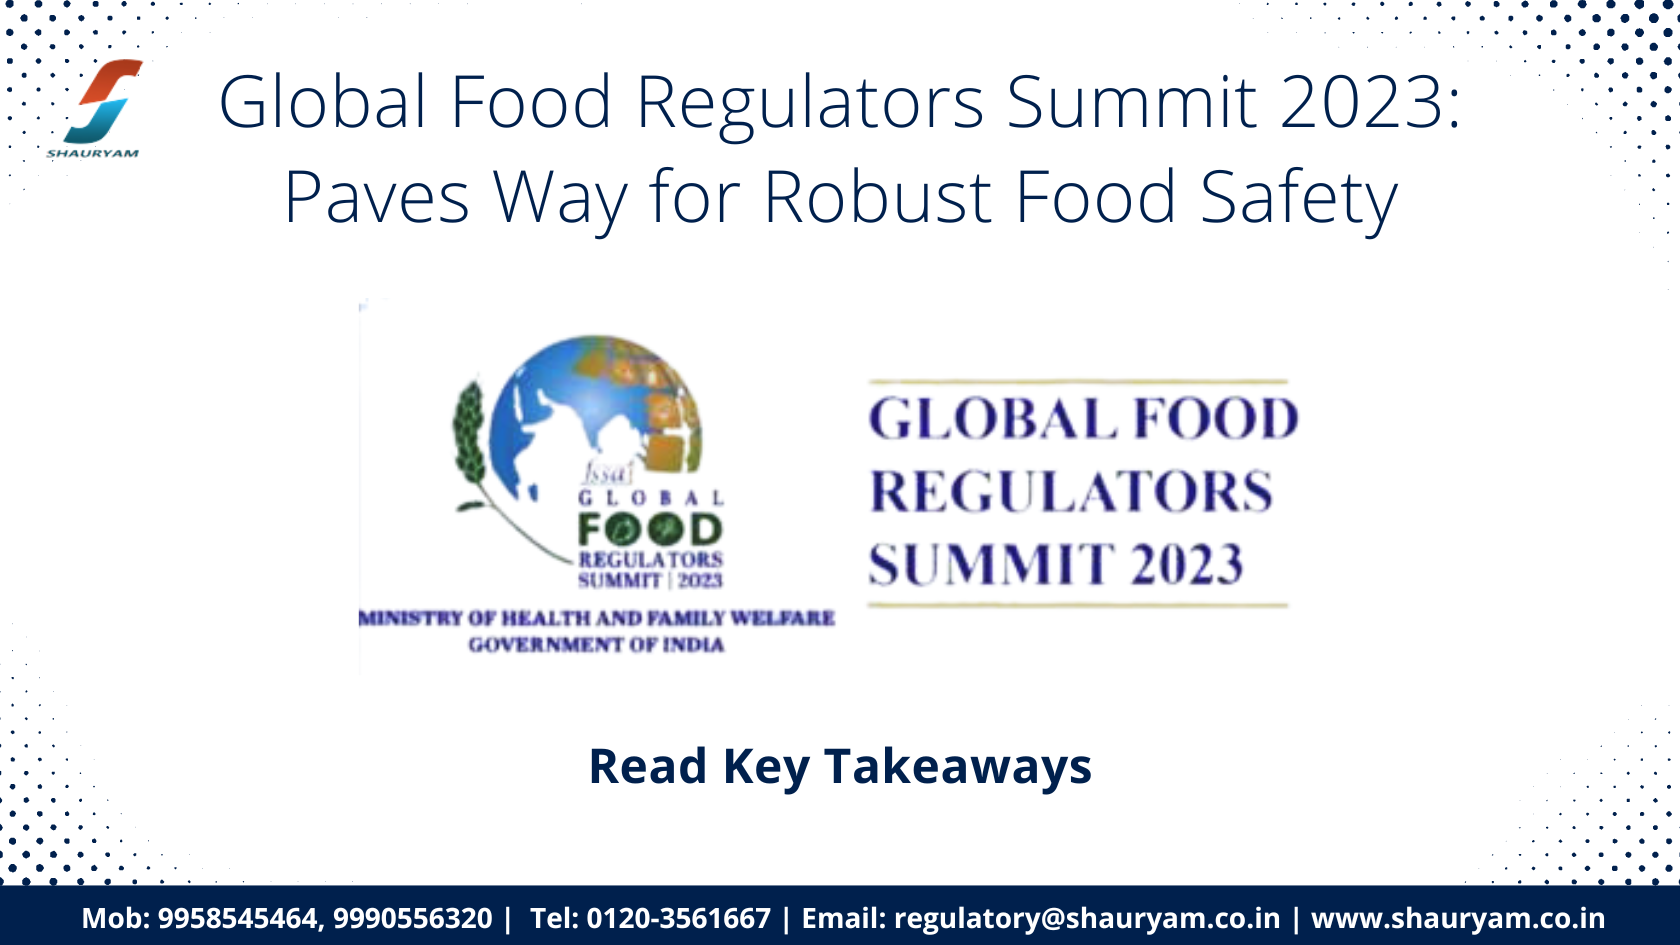 You are currently viewing Global Food Regulators Summit 2023: Learn Key Takeaways from the Summit